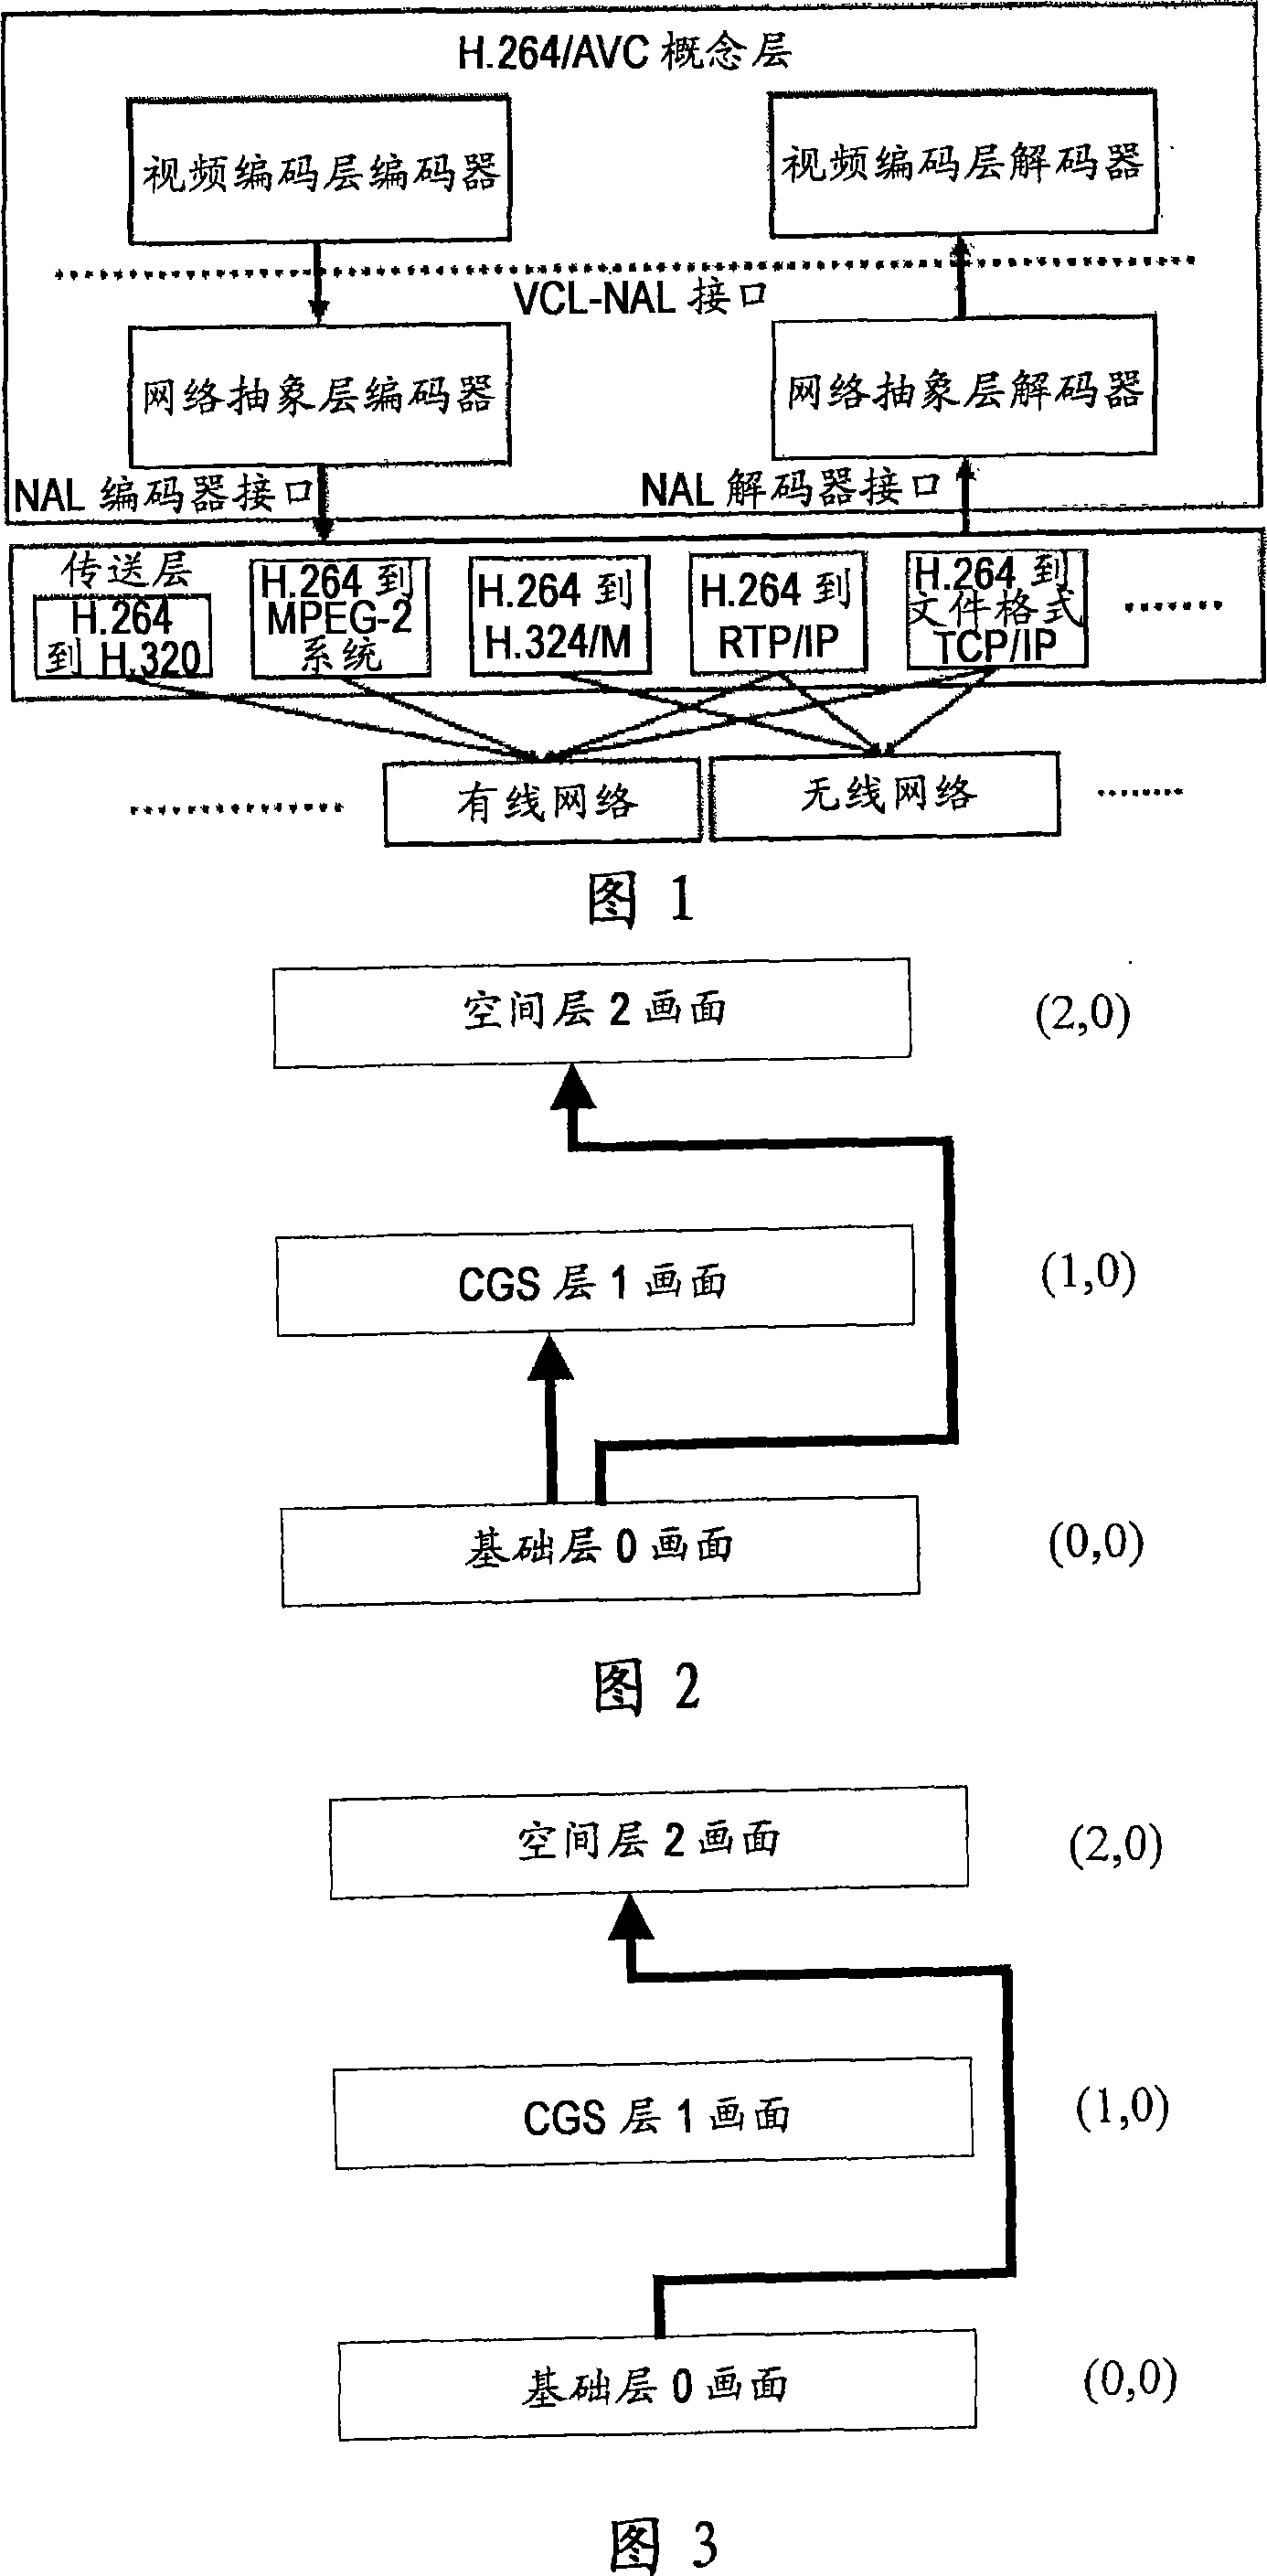 Coding dependency indication in scalable video coding